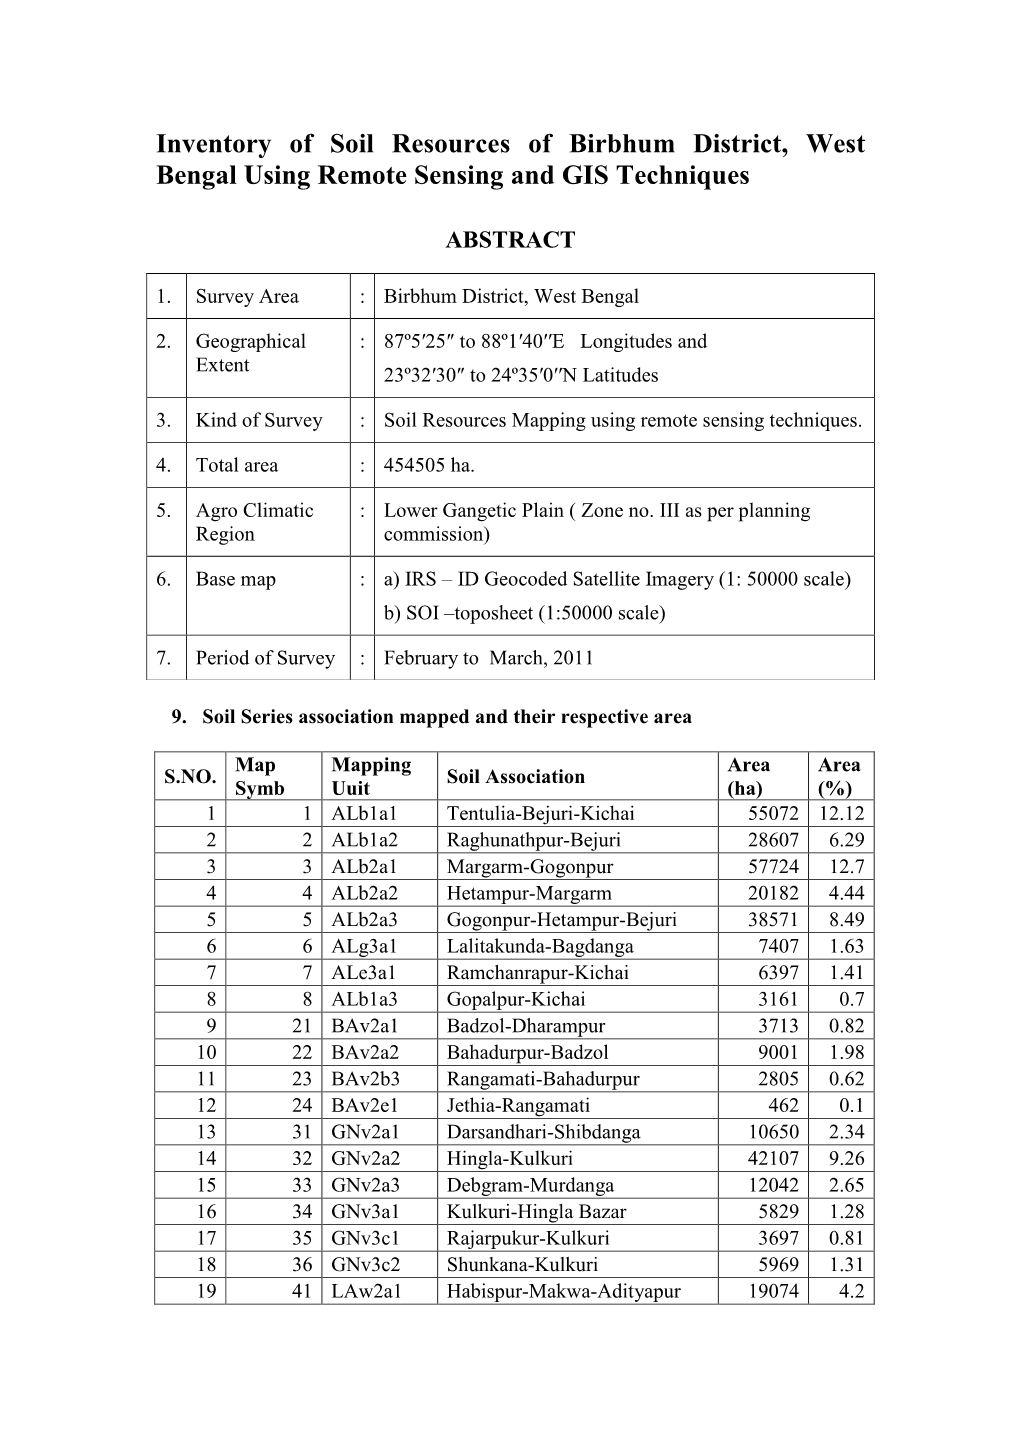 Inventory of Soil Resources of Birbhum District, West Bengal Using Remote Sensing and GIS Techniques